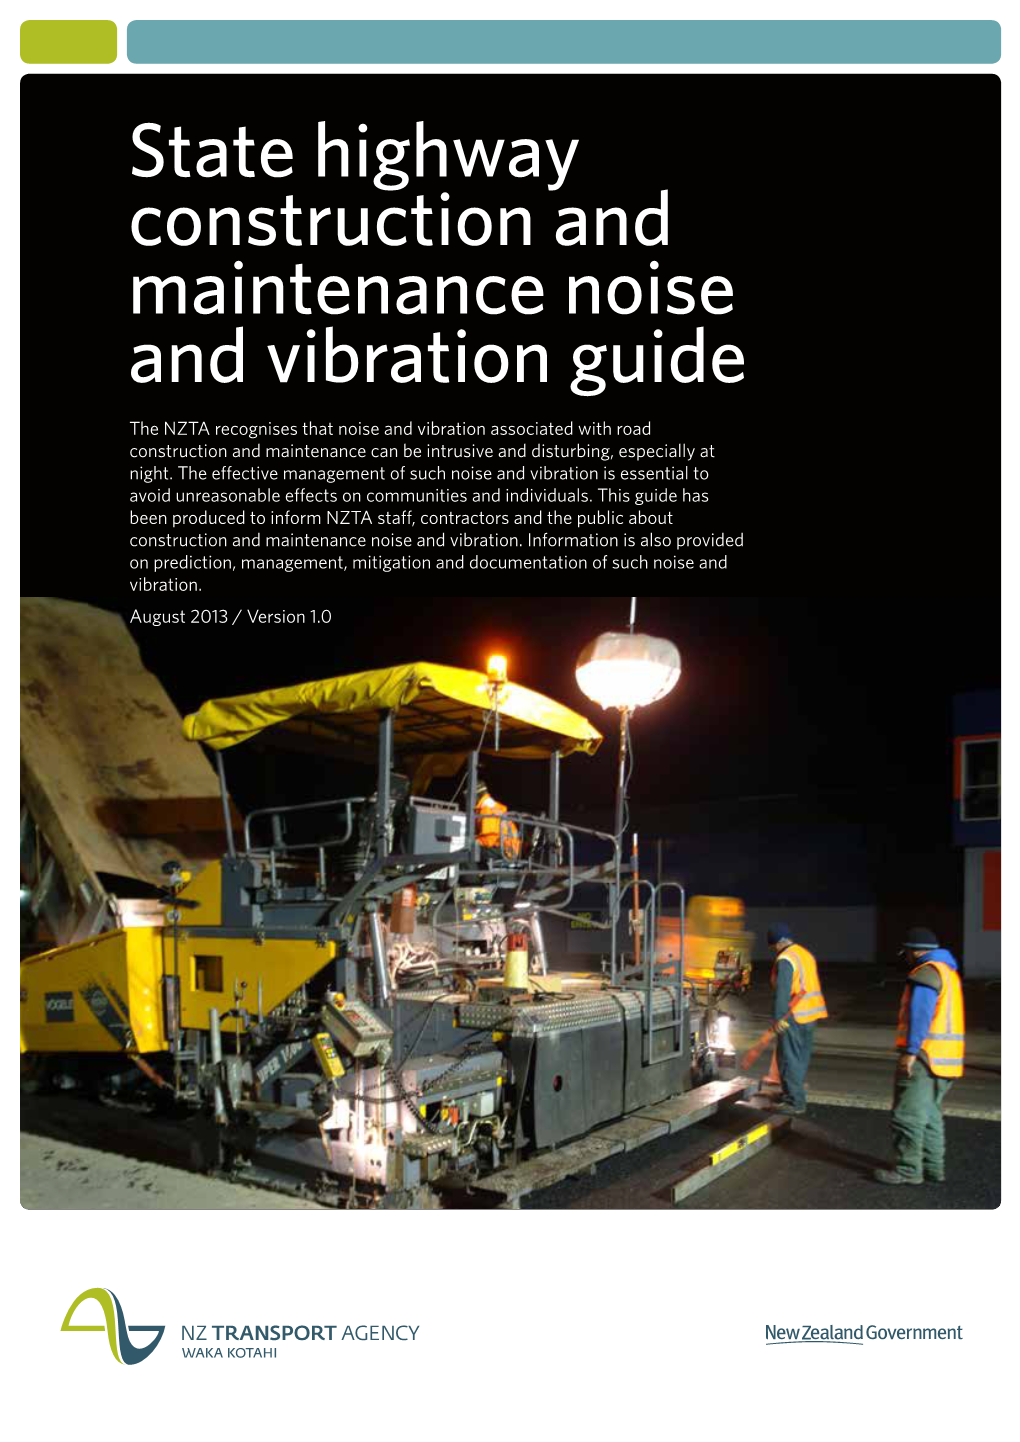 State Highway Construction and Maintenance Noise and Vibration